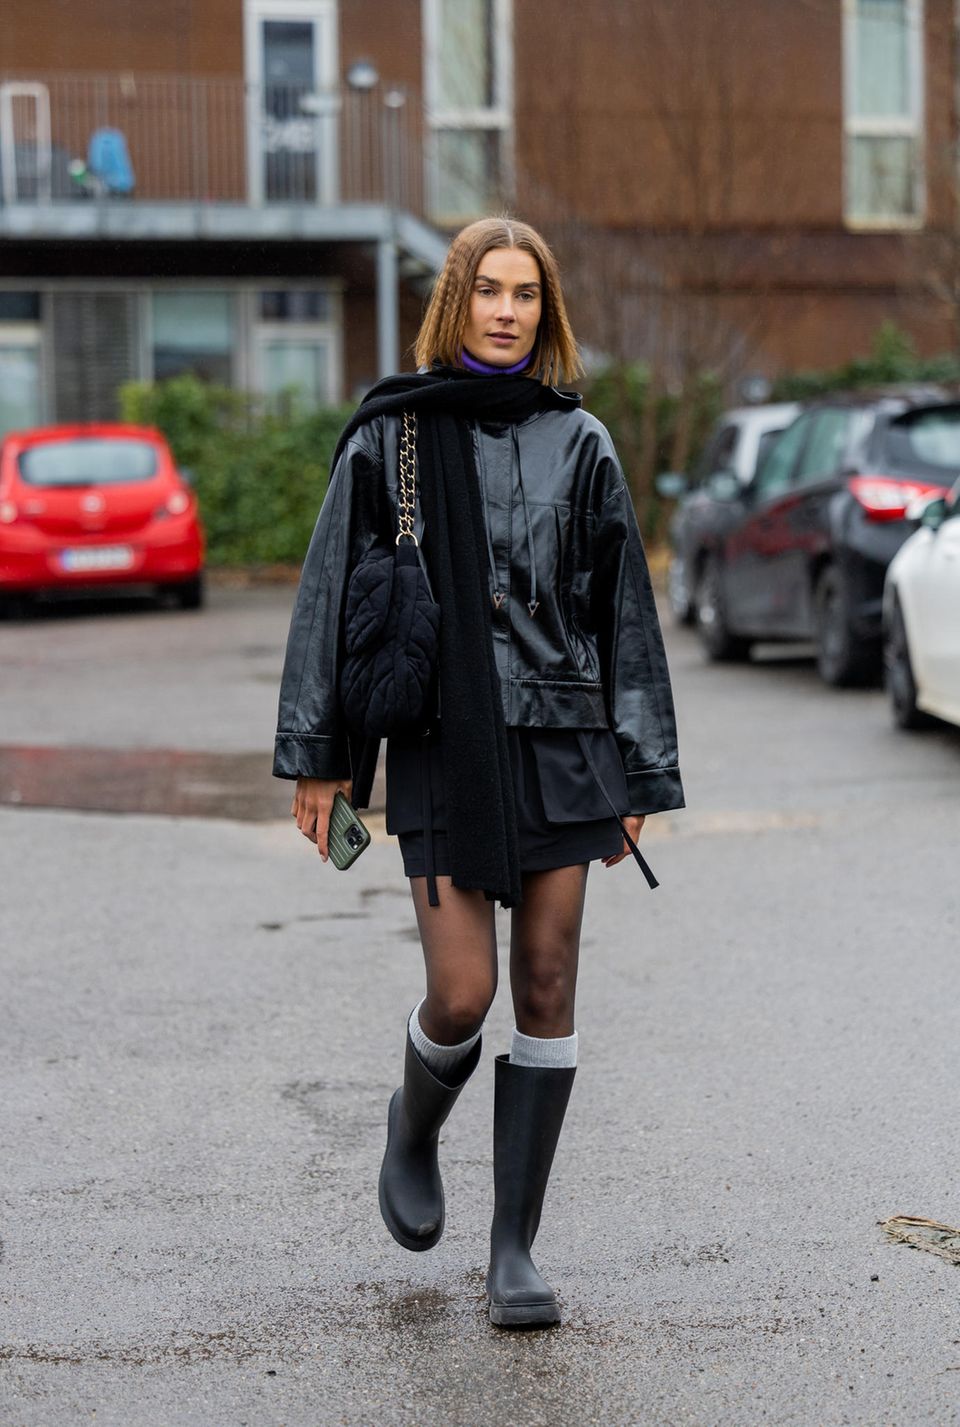 Overknees and knee socks: This is how we wear the sock trends in everyday life